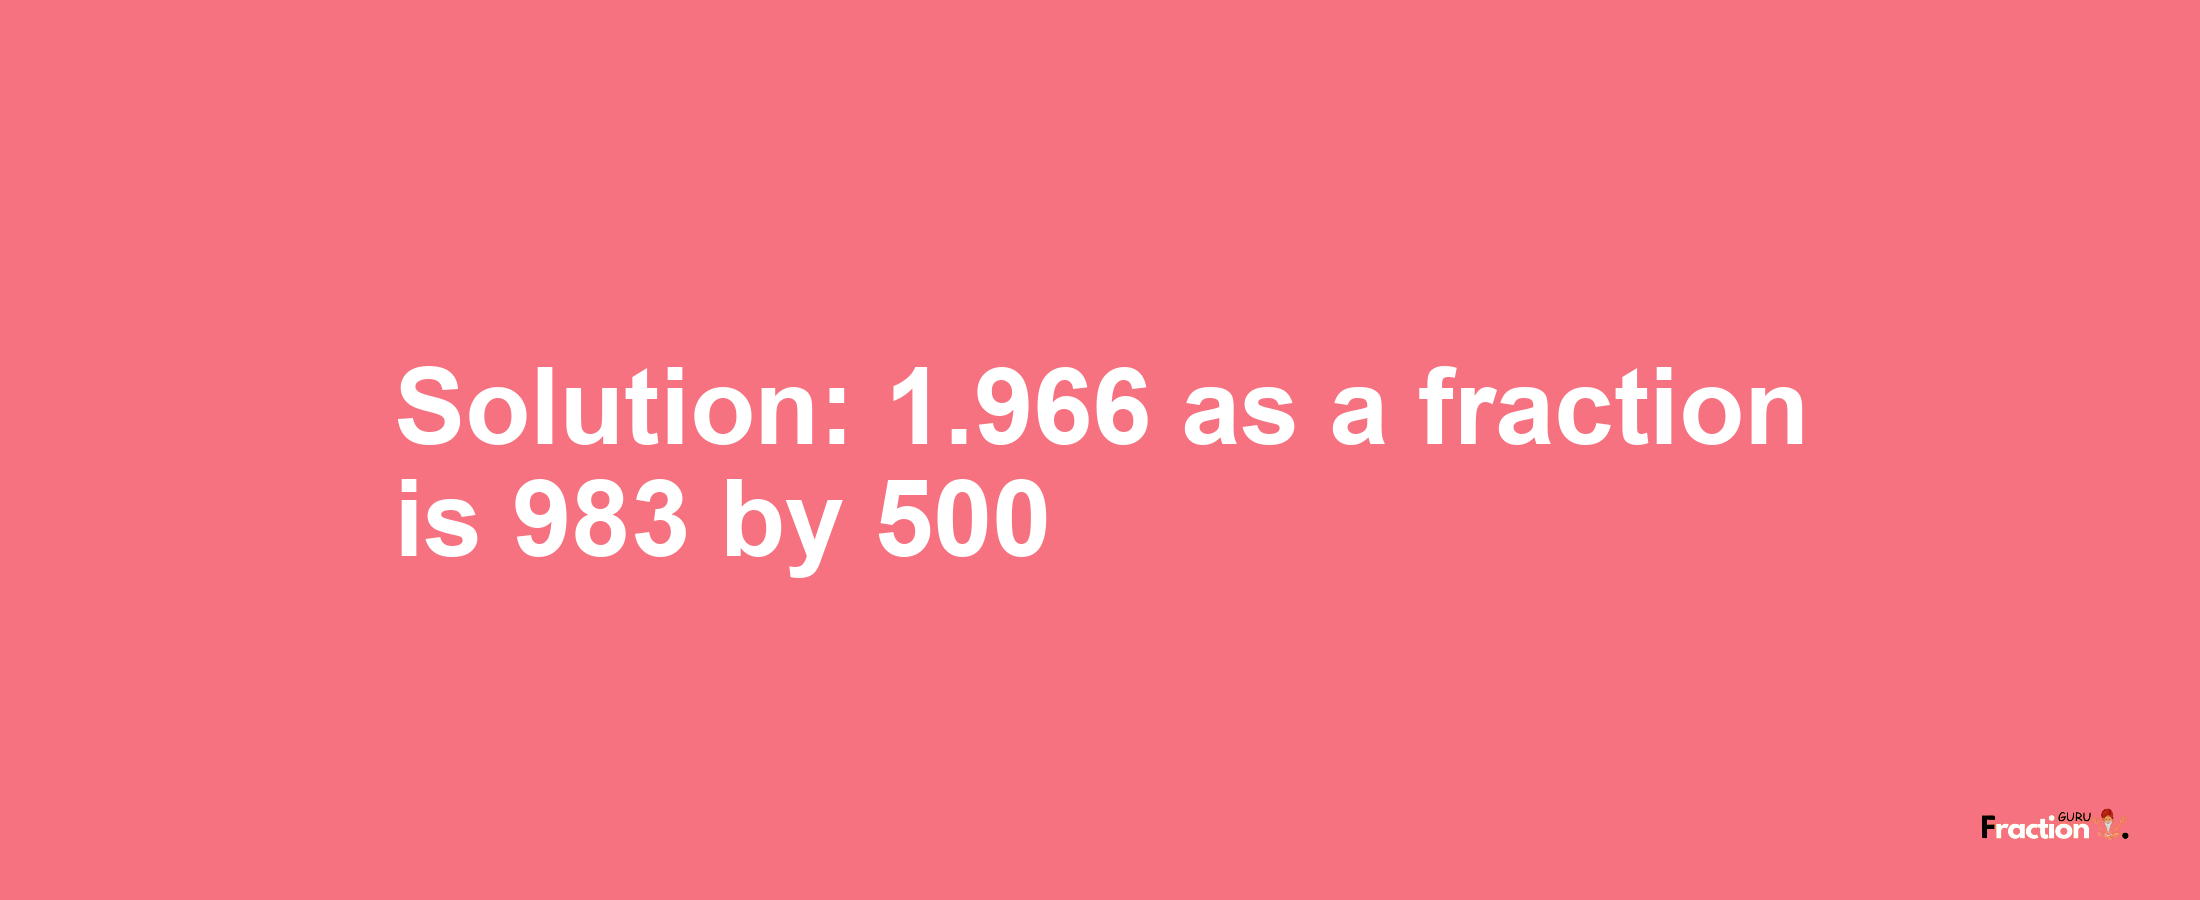 Solution:1.966 as a fraction is 983/500